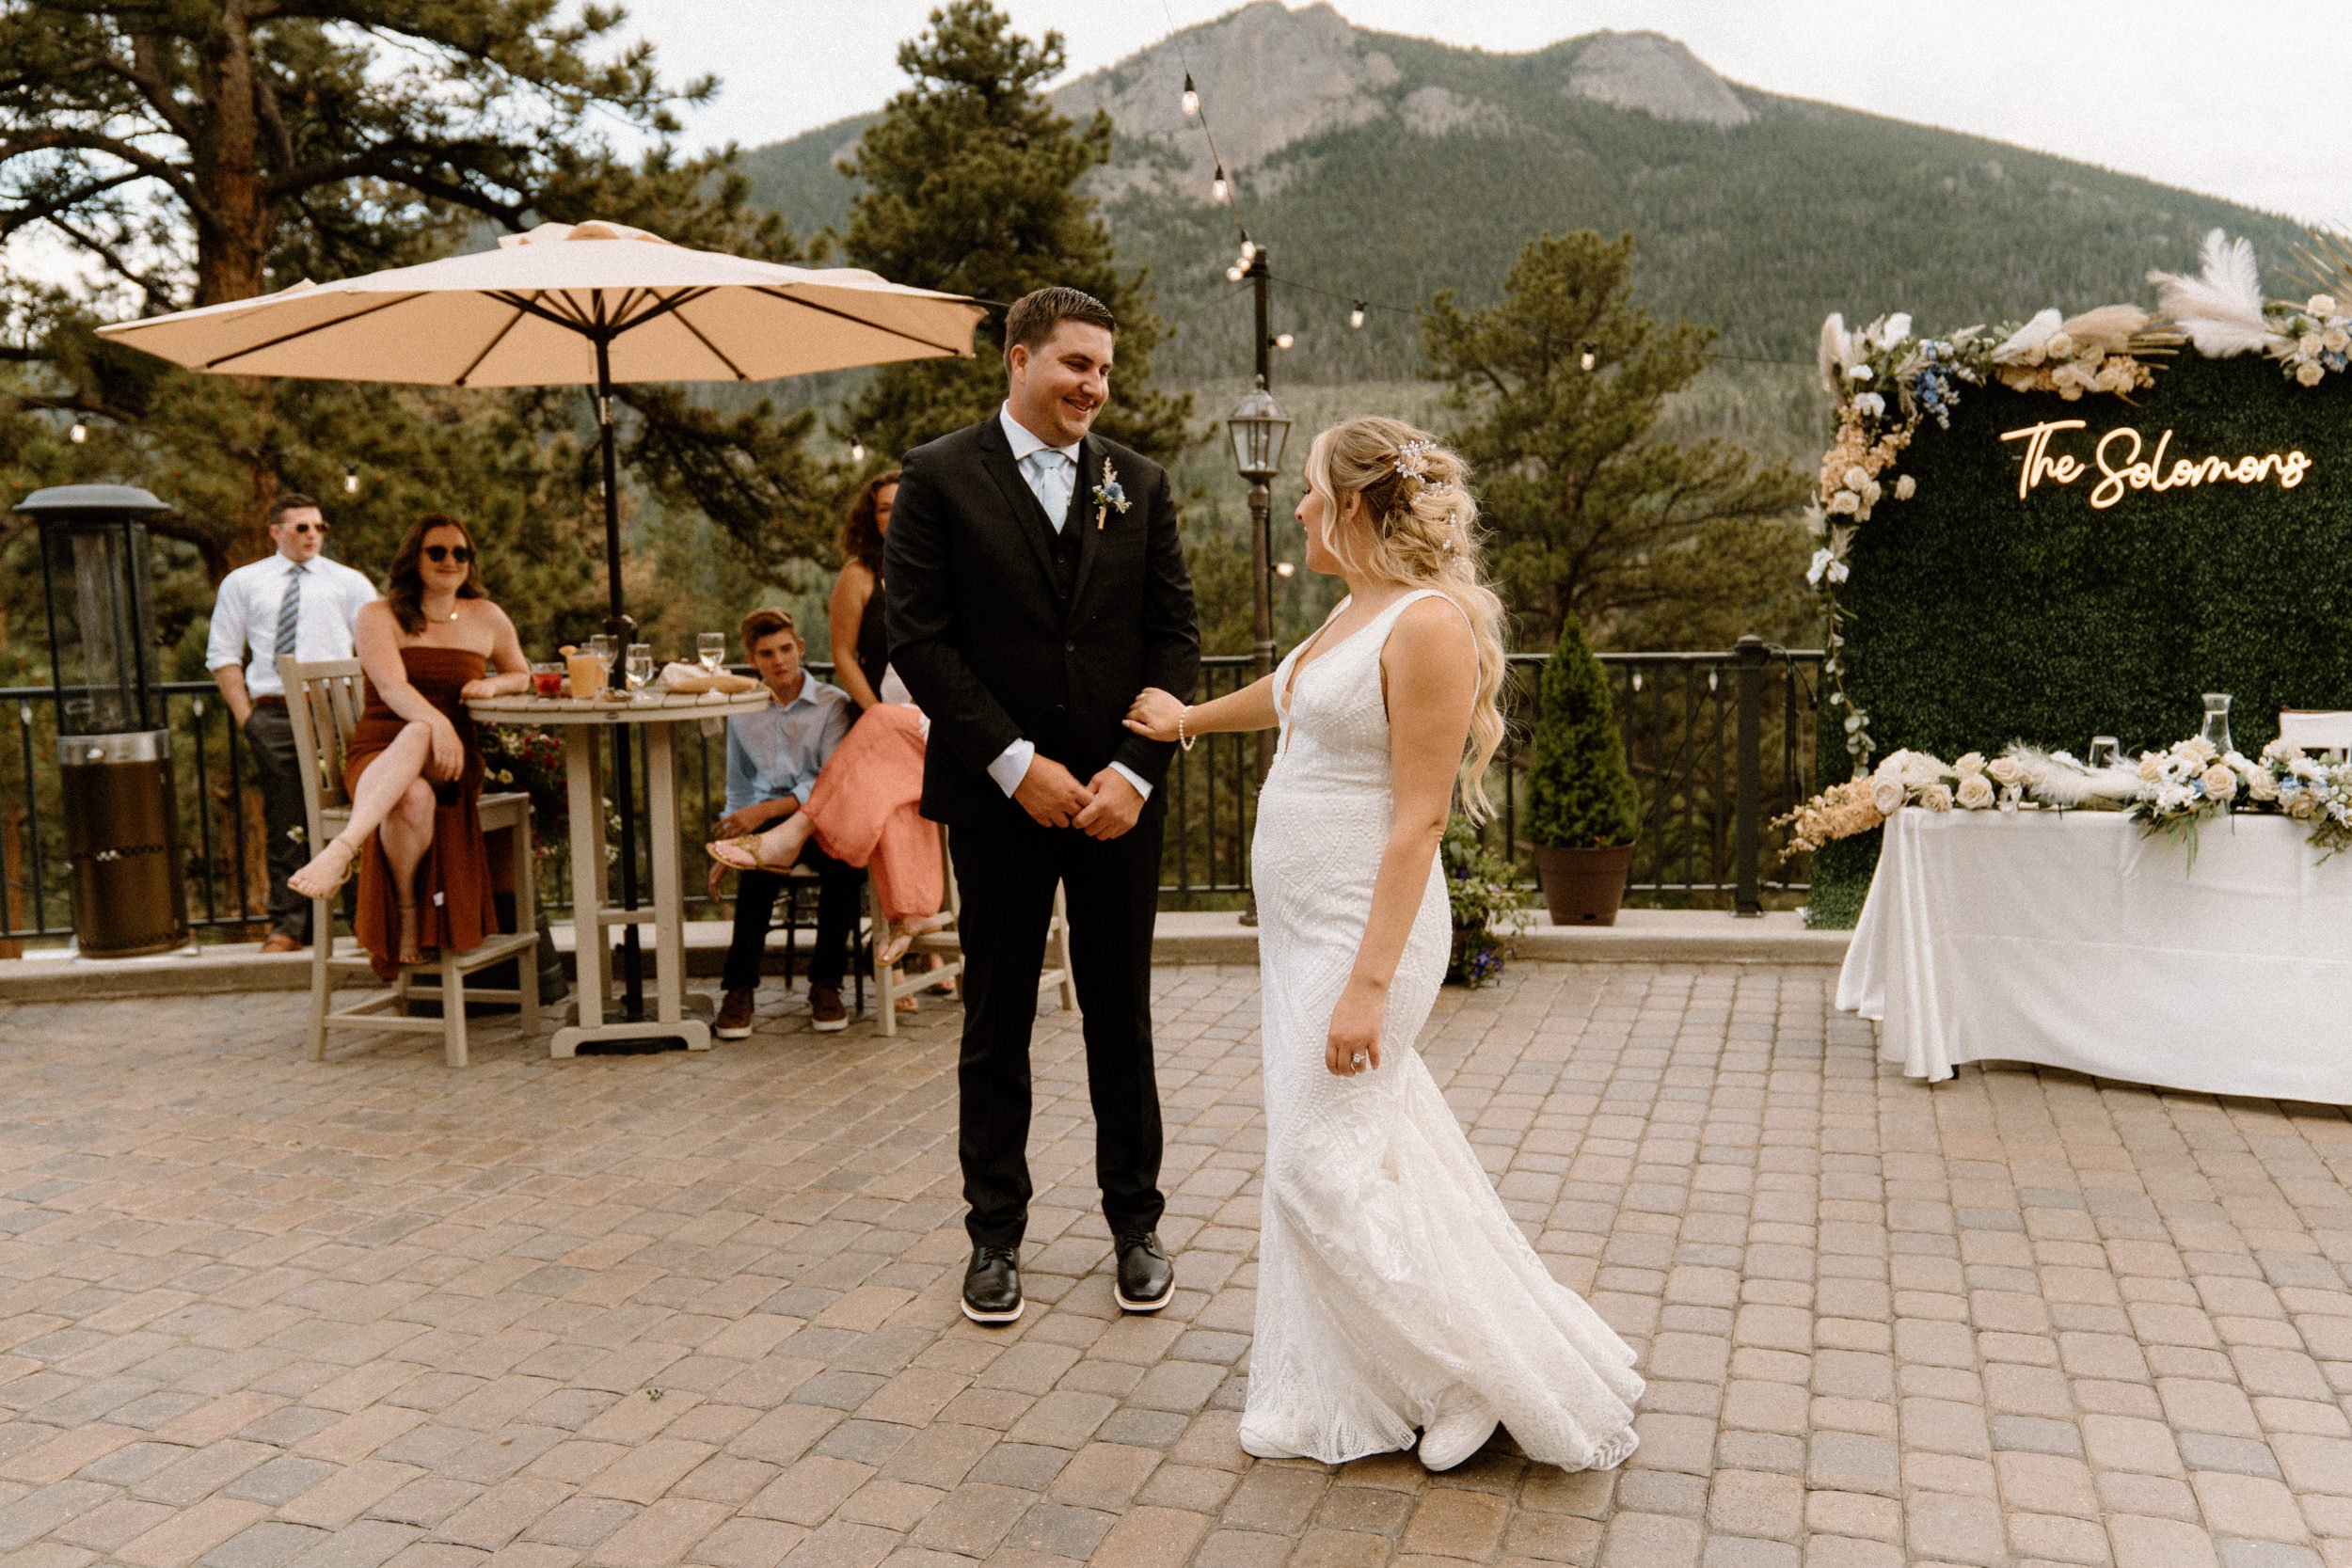 The bride and groom share their first dance on the outdoor patio at the Della Terra Mountain Chateau in Estes Park, CO